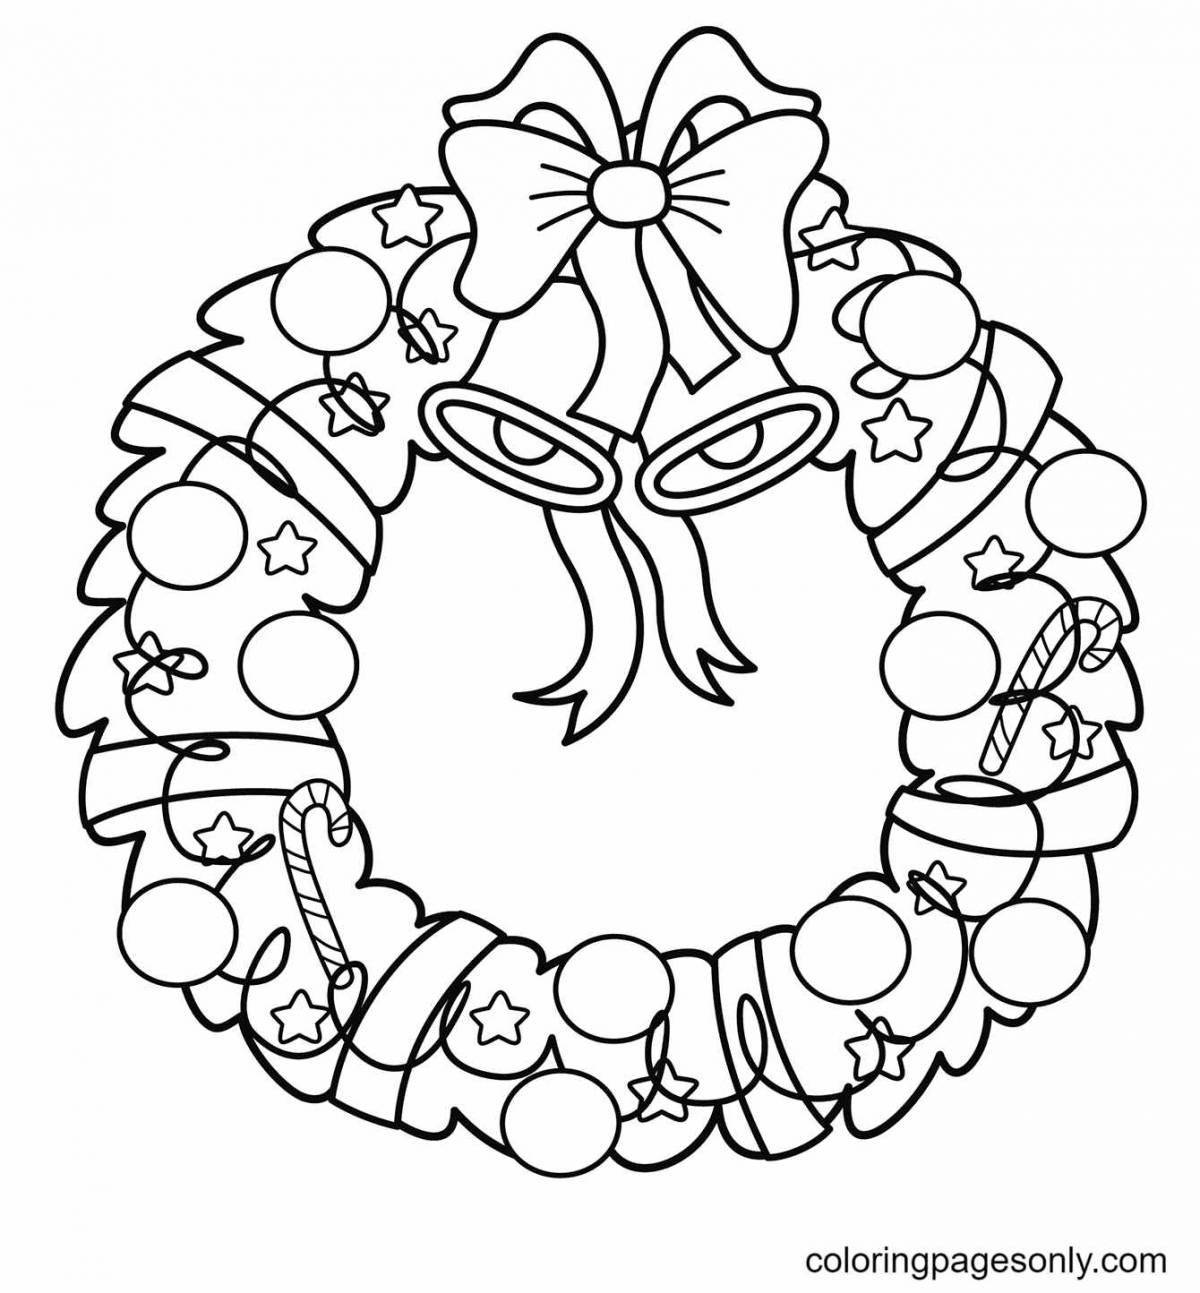 Luxury wreath coloring page